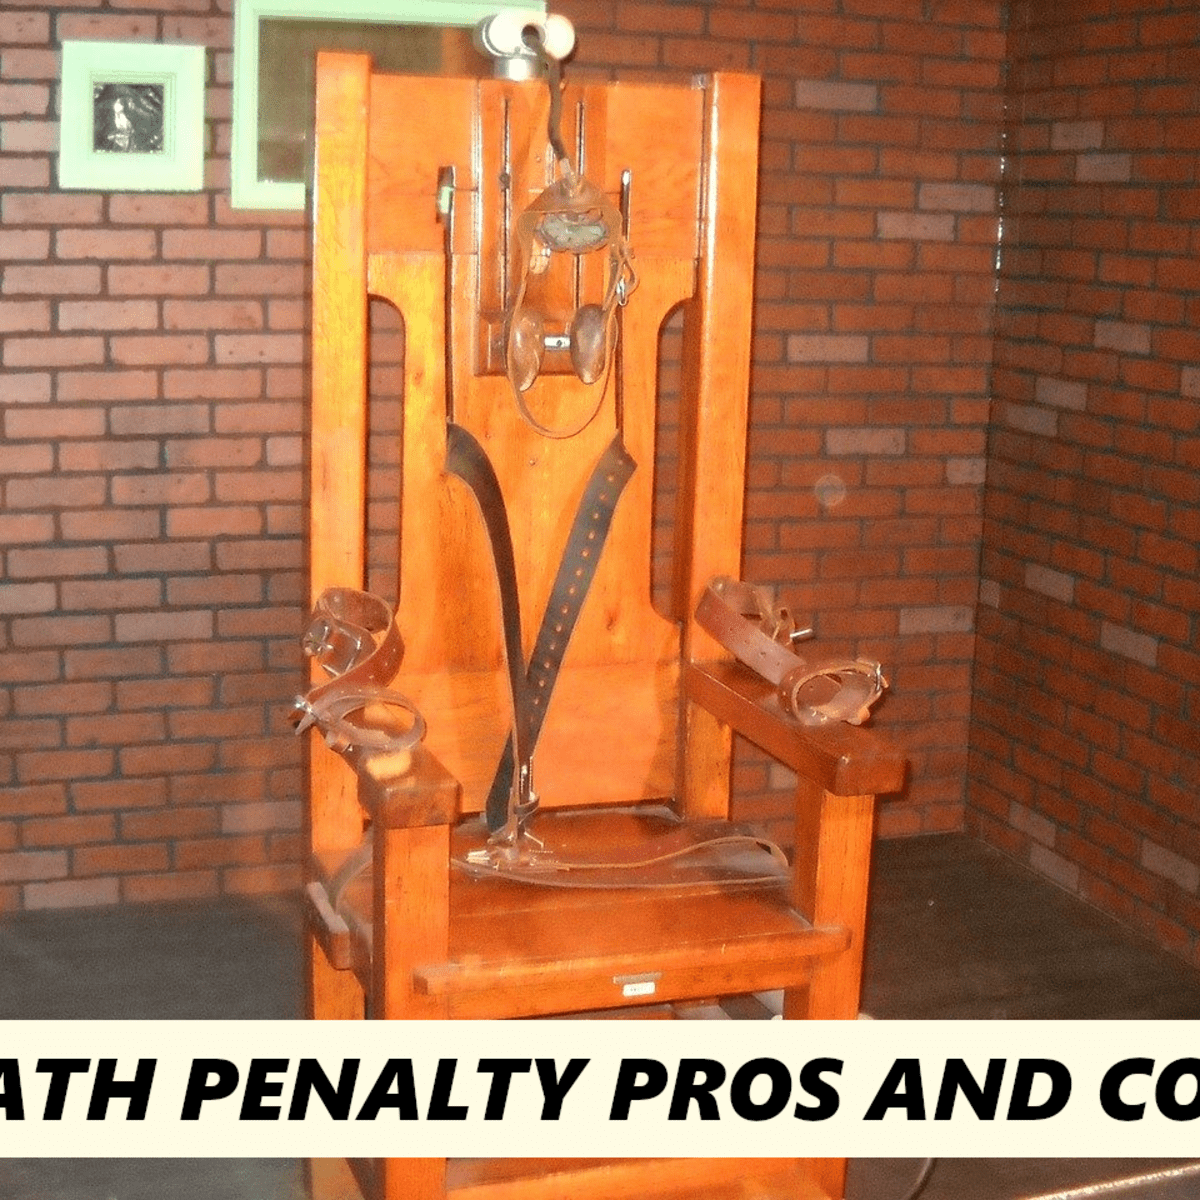 essay on capital punishment should not be banned